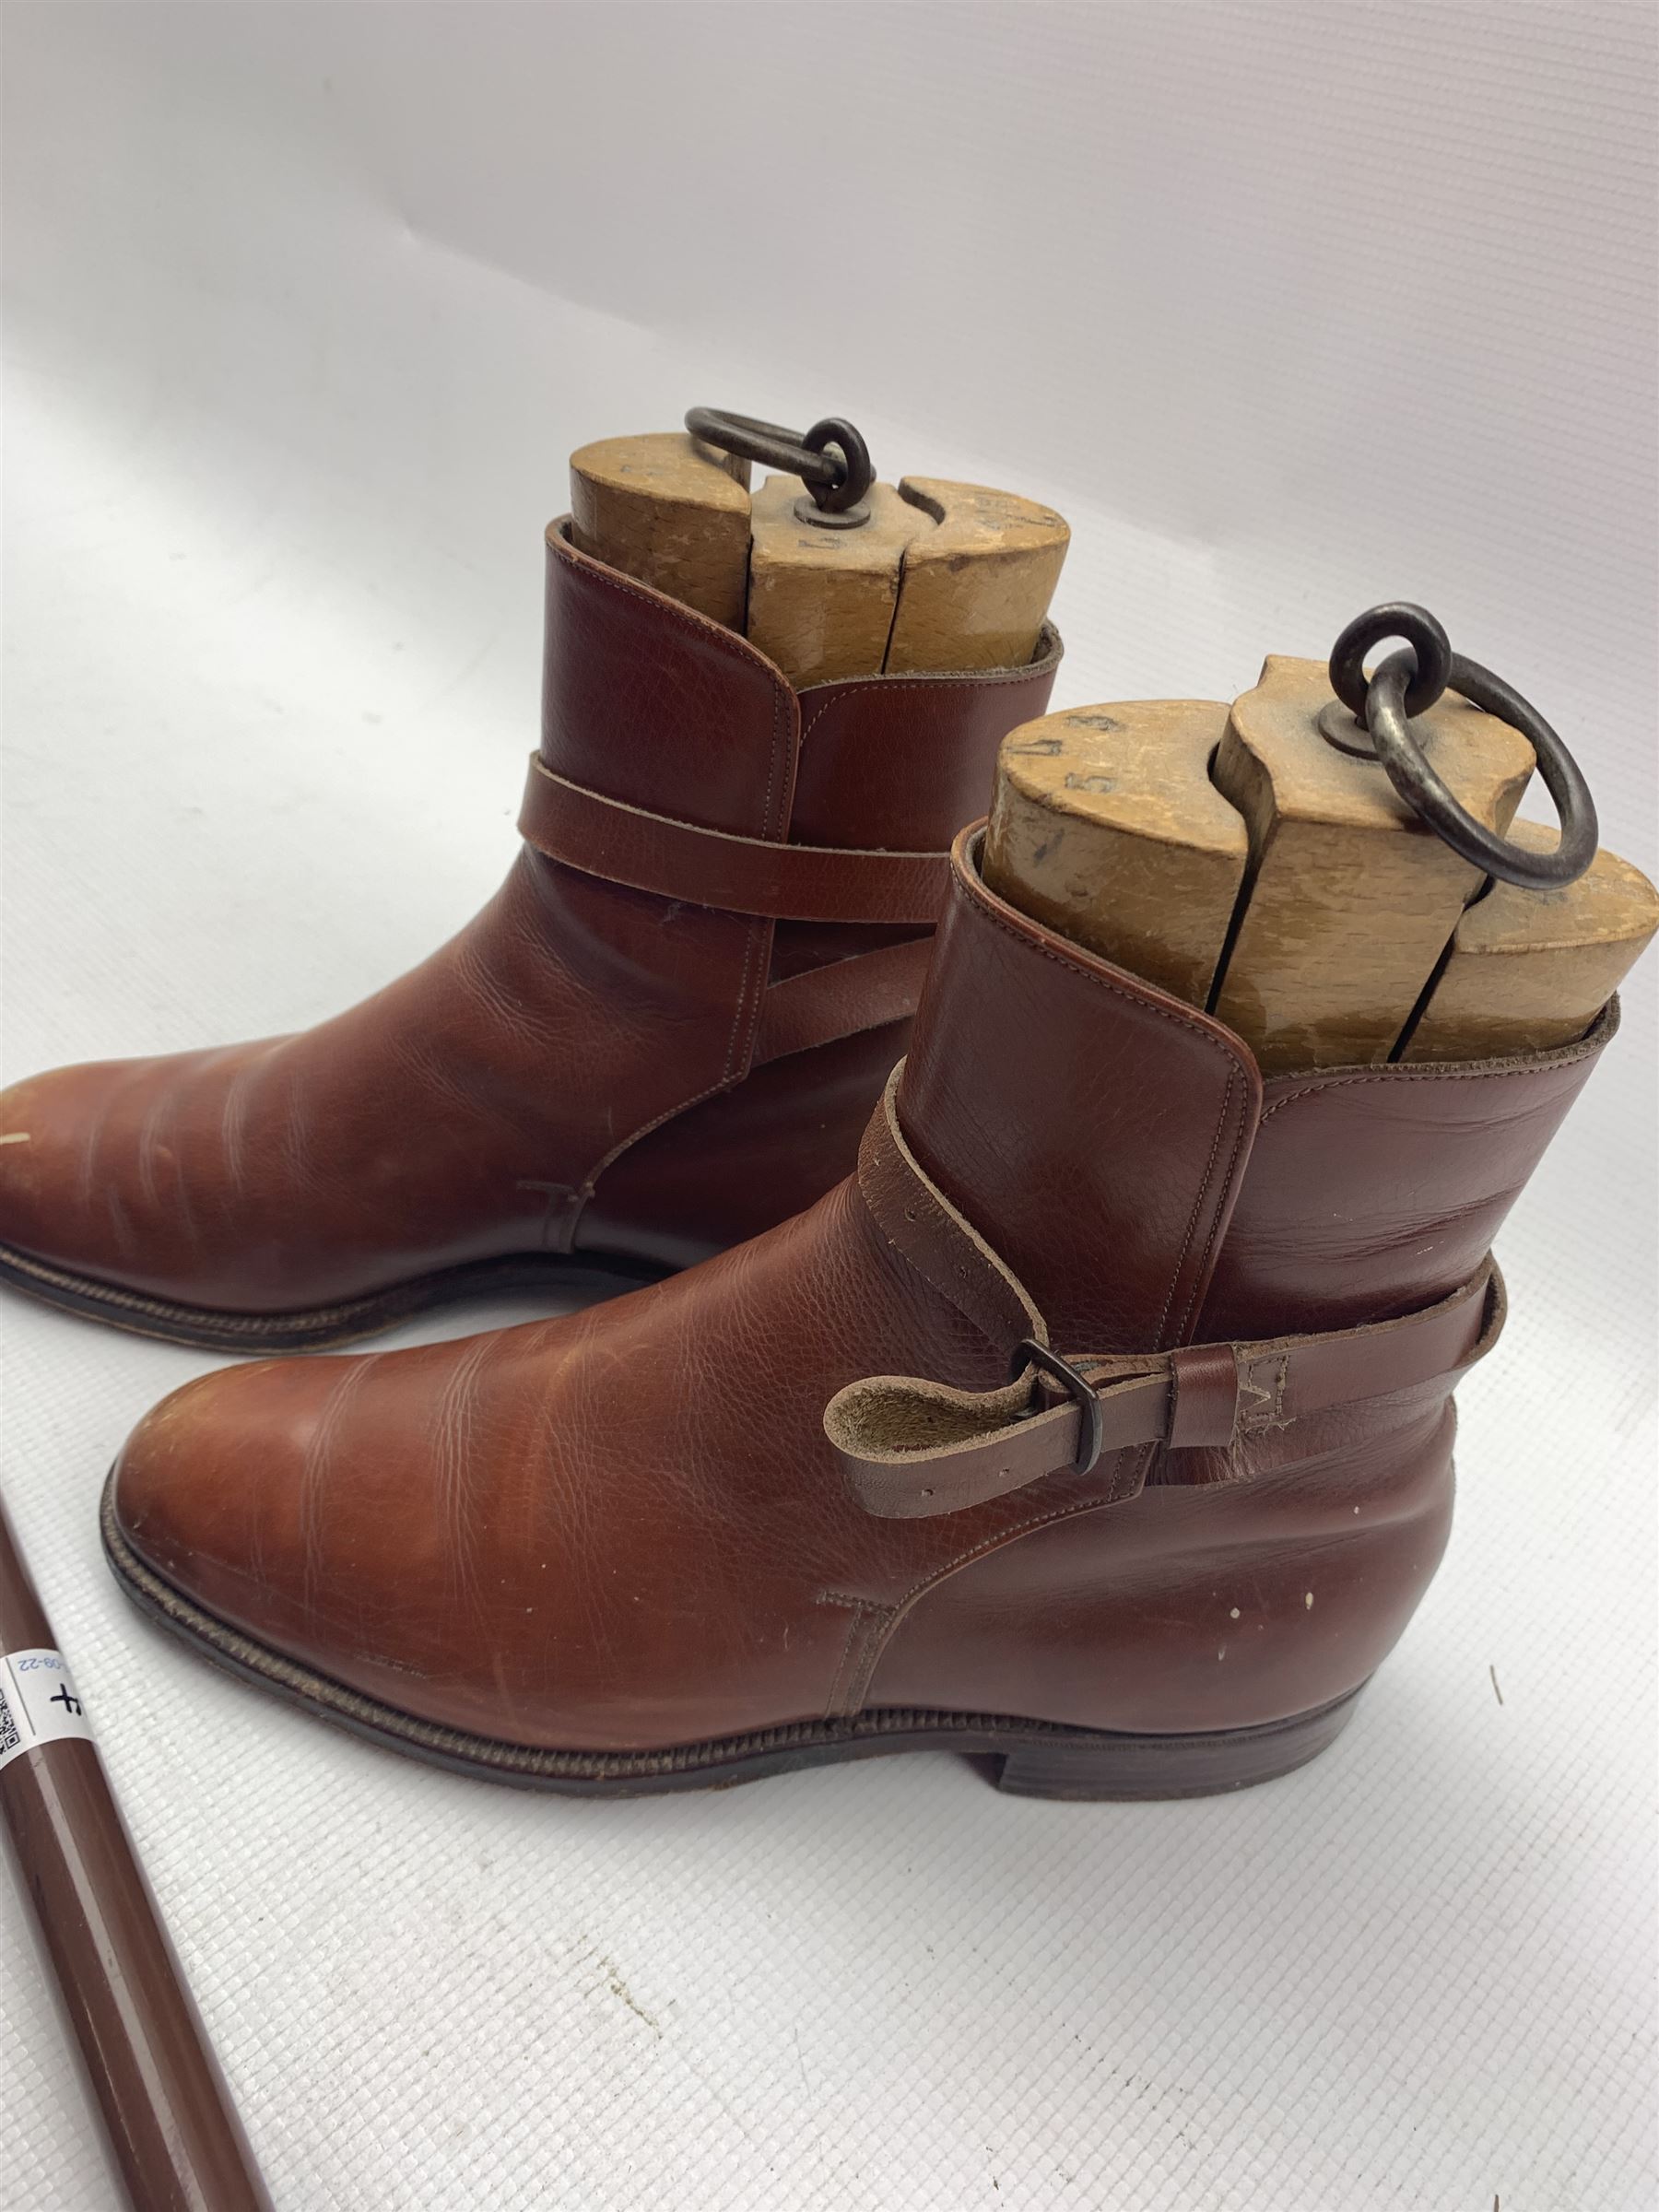 Pair of tan leather boots and wooden tree inserts - Image 2 of 3